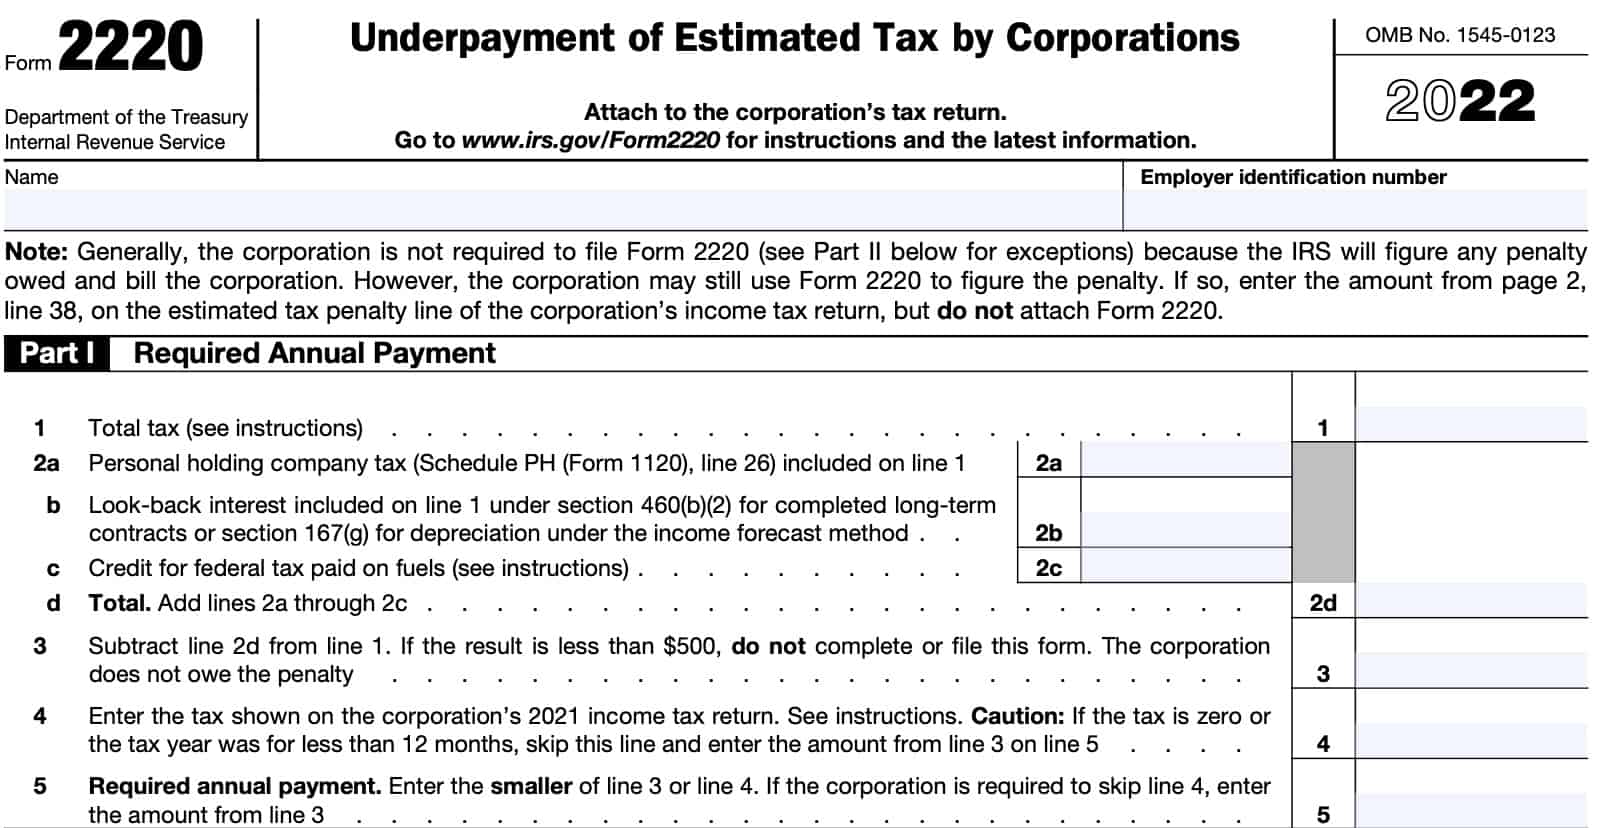 irs form 2220 part i: required annual payment